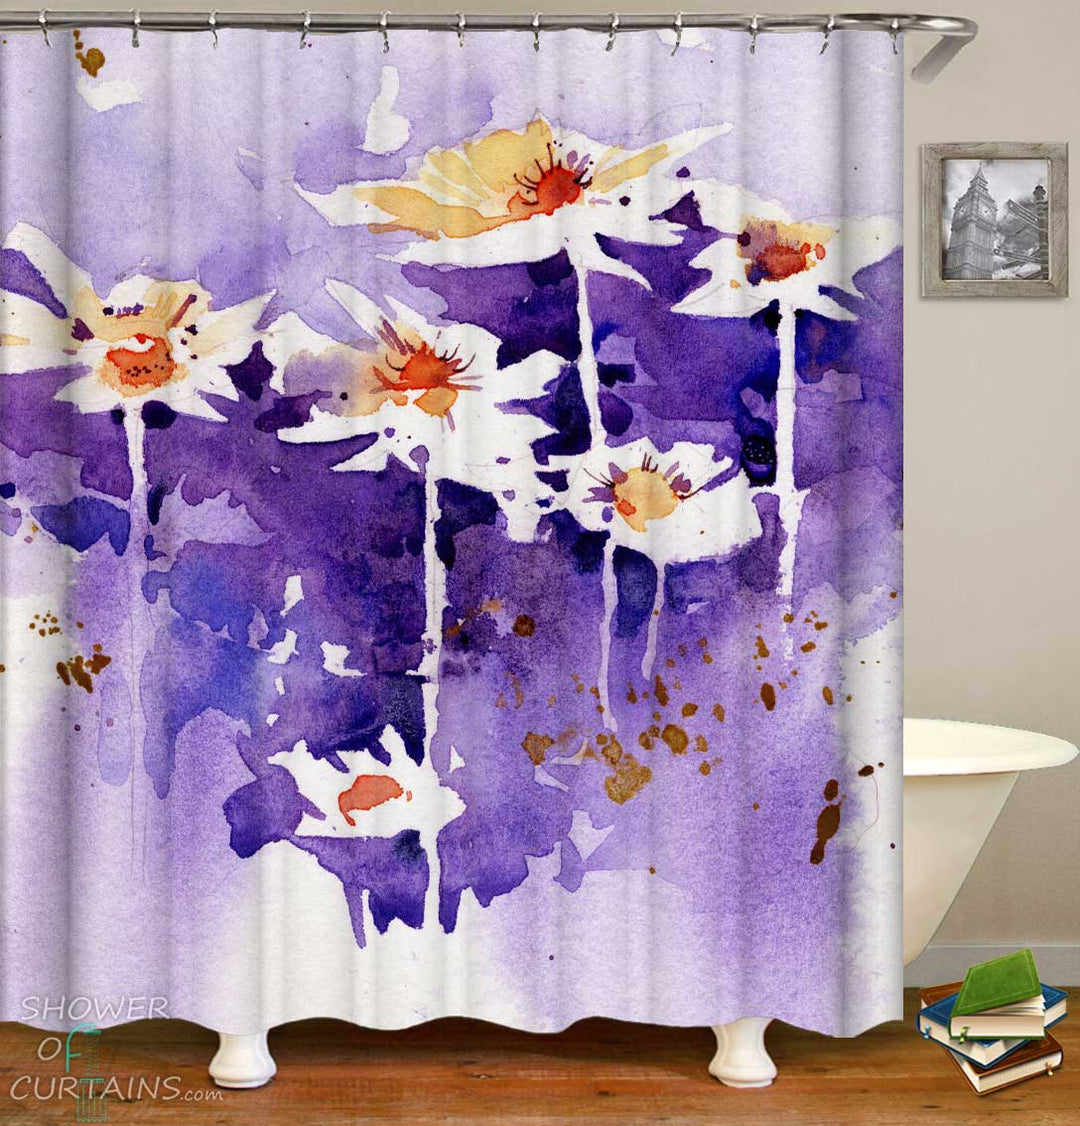 Shower Curtains with Purplish Floral Art